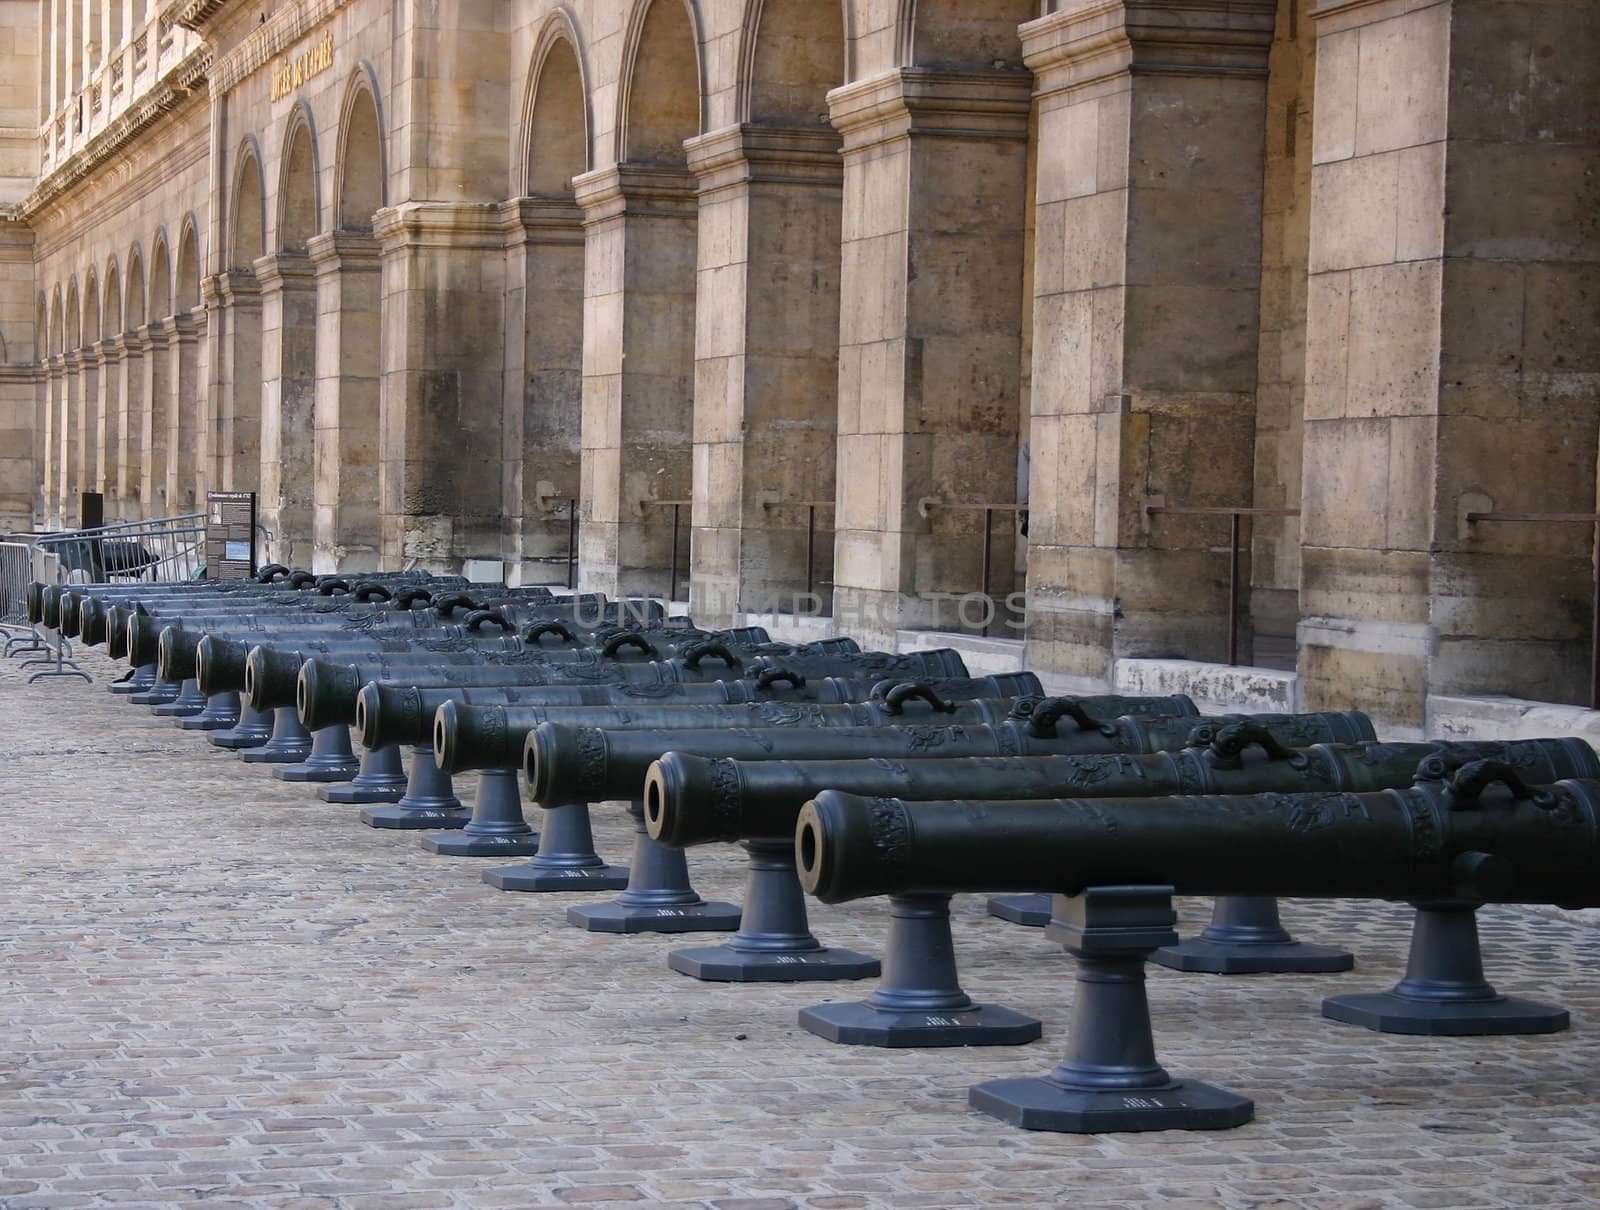 cannons on courtyard in les invalides - Paris - France